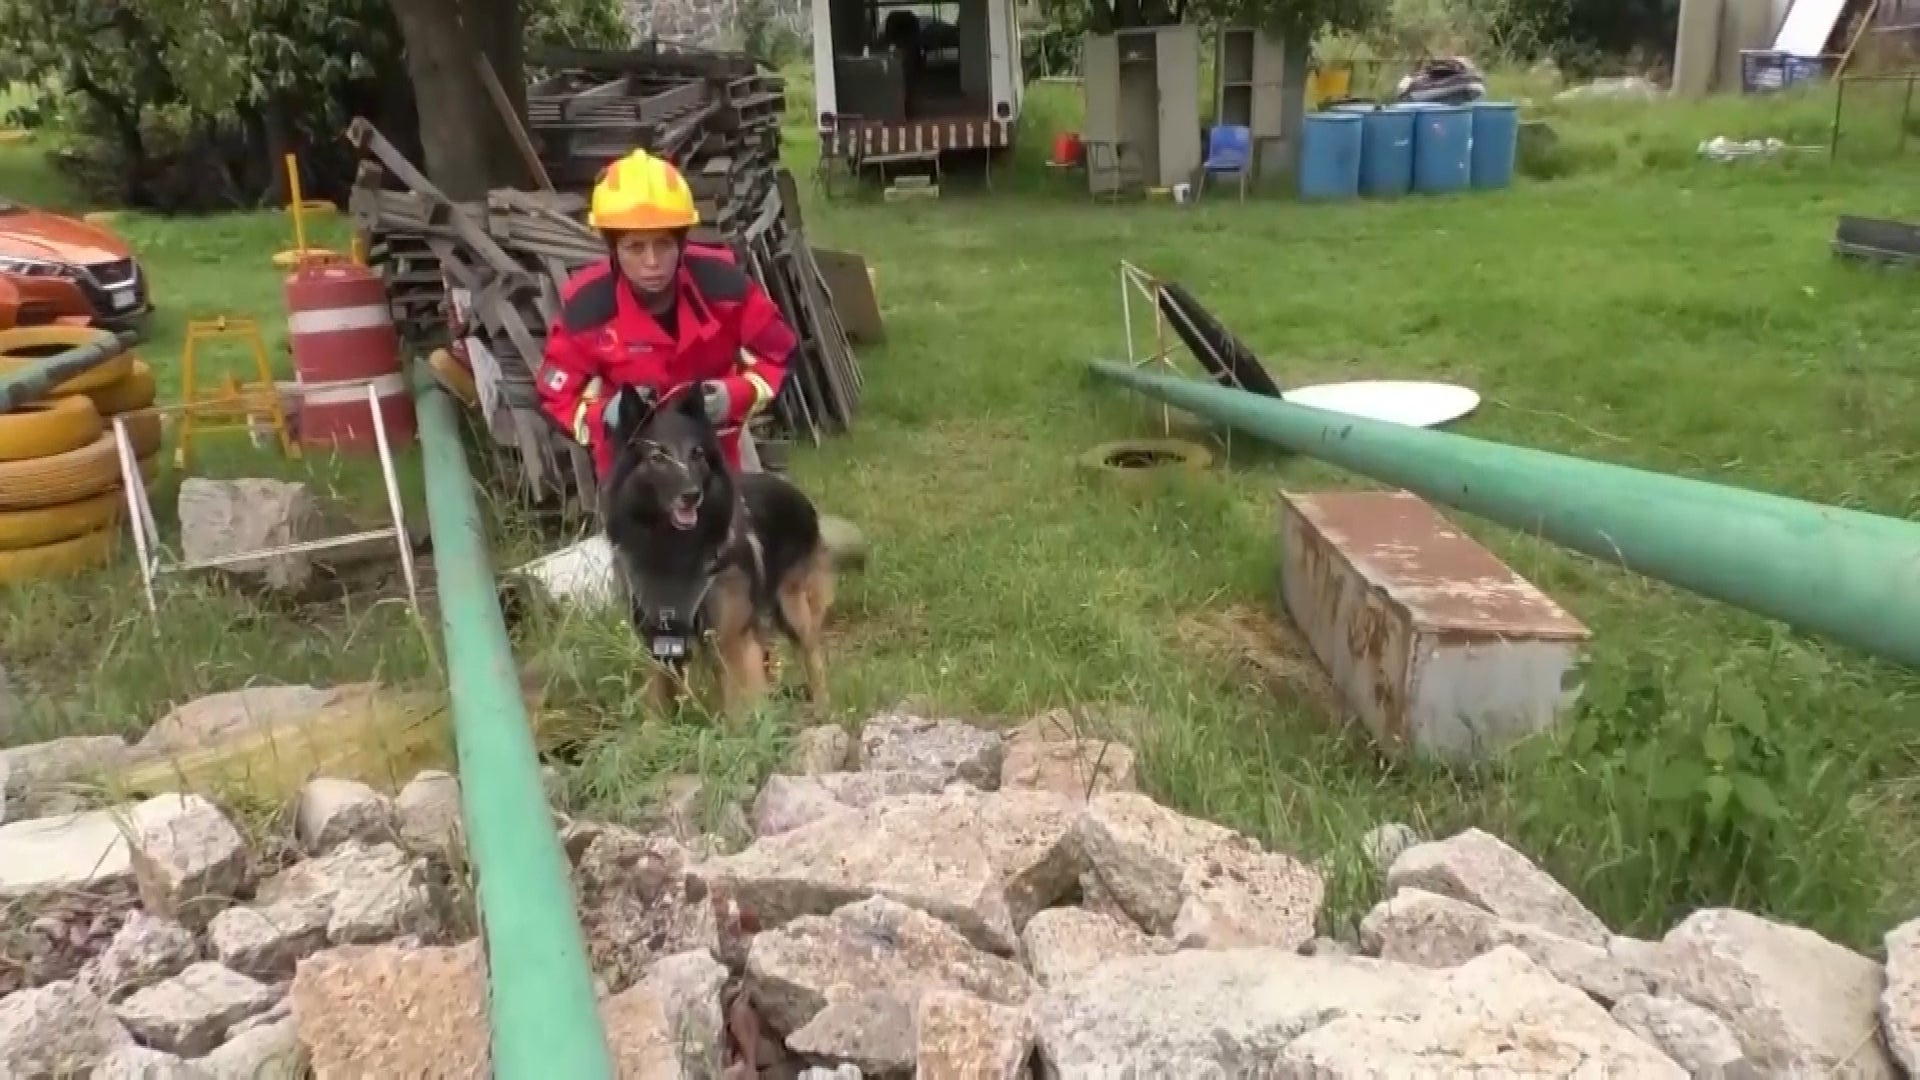 how are rescue dogs trained